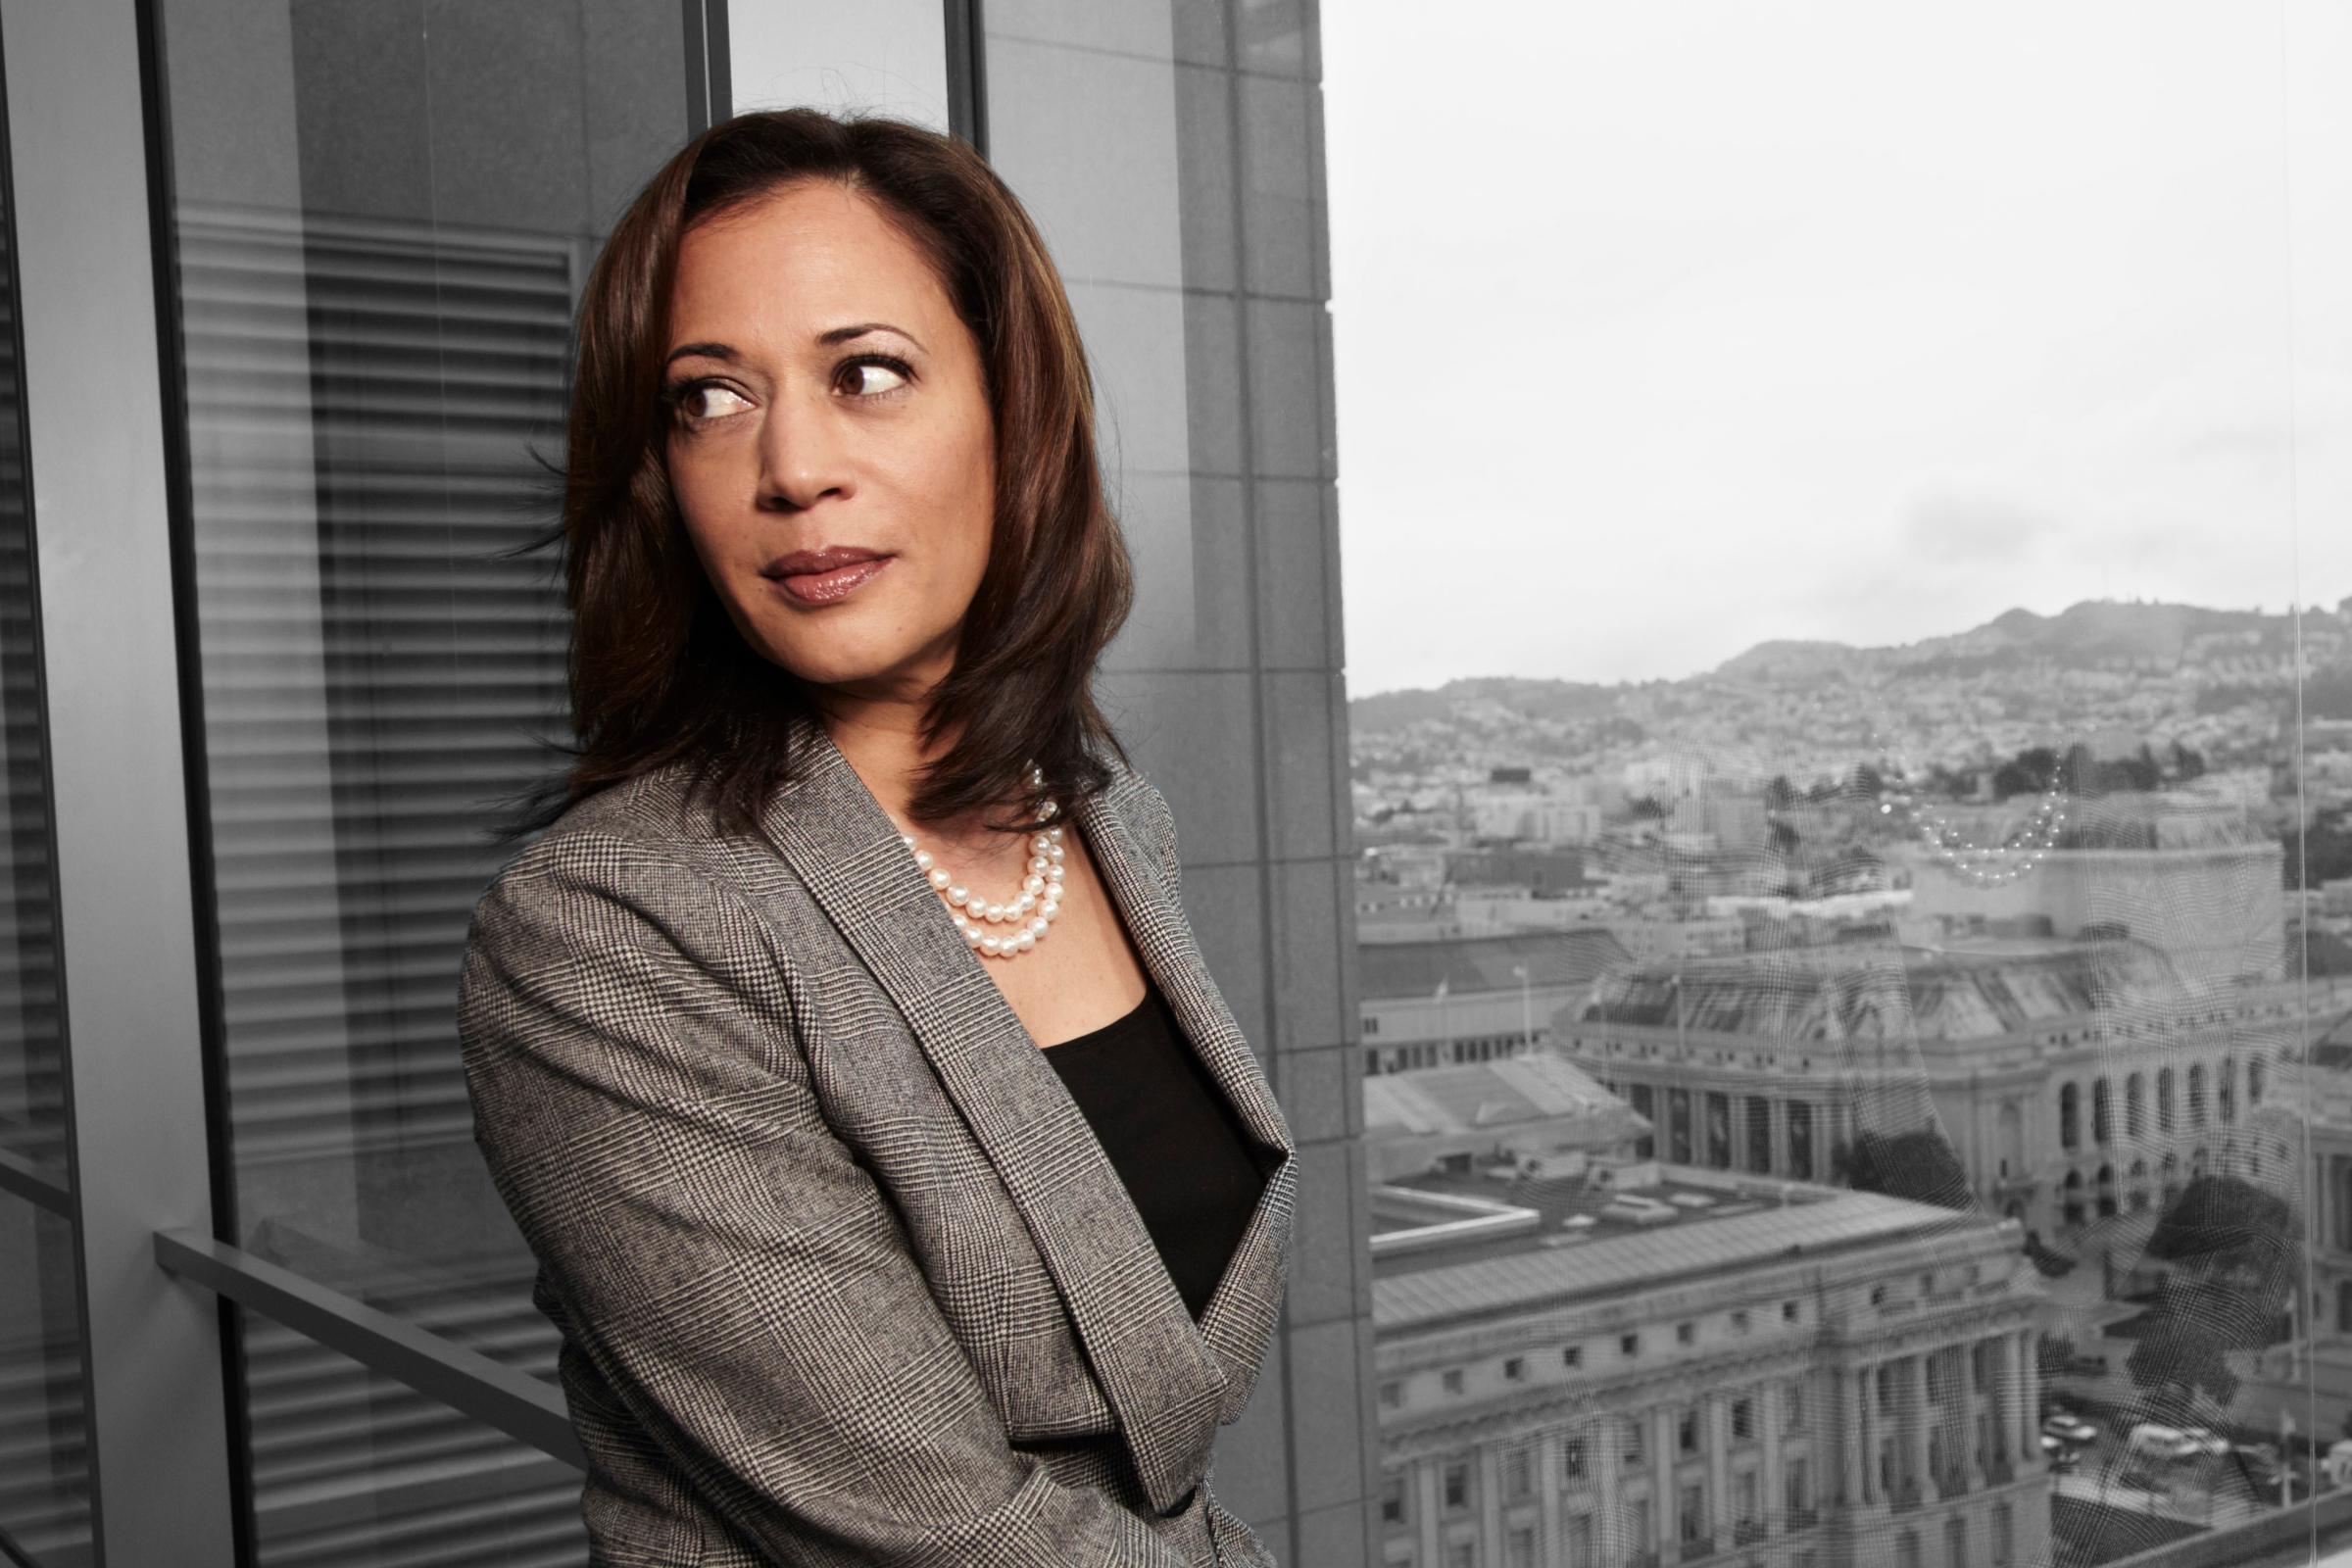 Kamala Harris The California attorney general, a Democrat, is running for the seat being vacated by long-serving Sen. Barbara Boxer in California. If she wins, she would be the first black and the first South Asian Senator from the Golden State.